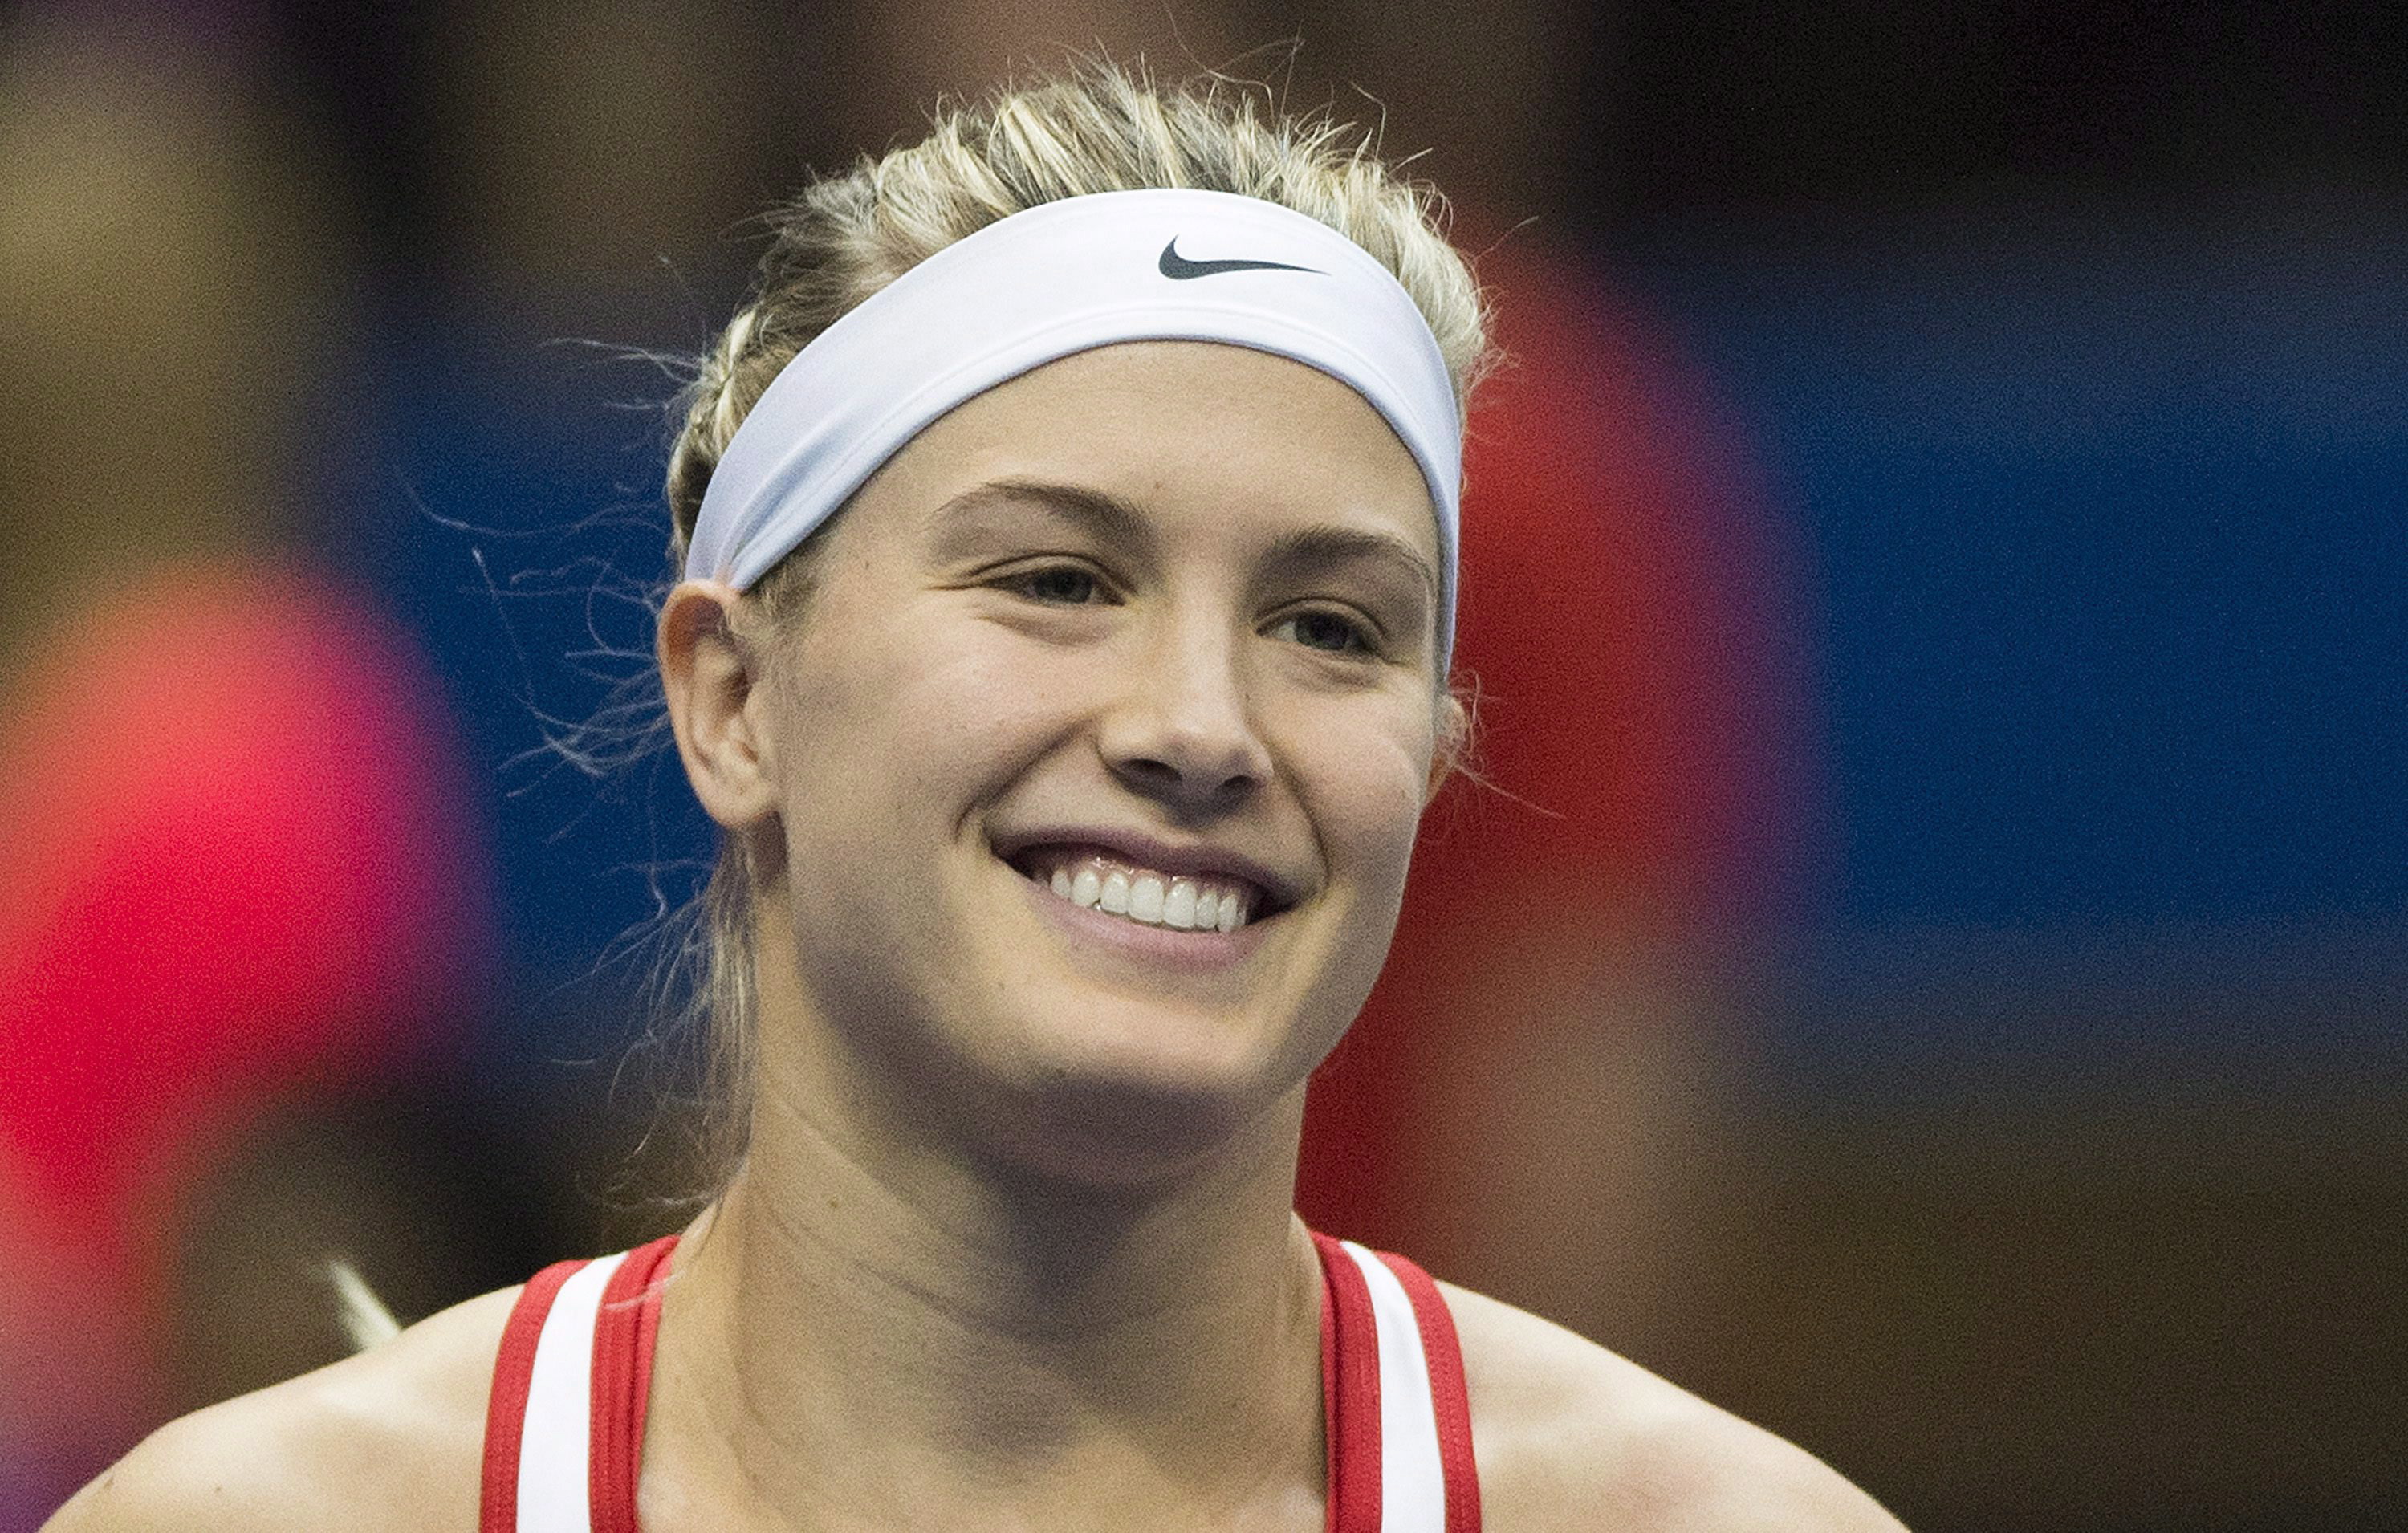 Canada's Eugenie Bouchard smiles at the start of her Federal Cup tennis match against Romania's Alexandra Dulgheru in Montreal, Saturday, April 18, 2015. THE CANADIAN PRESS/Graham Hughes